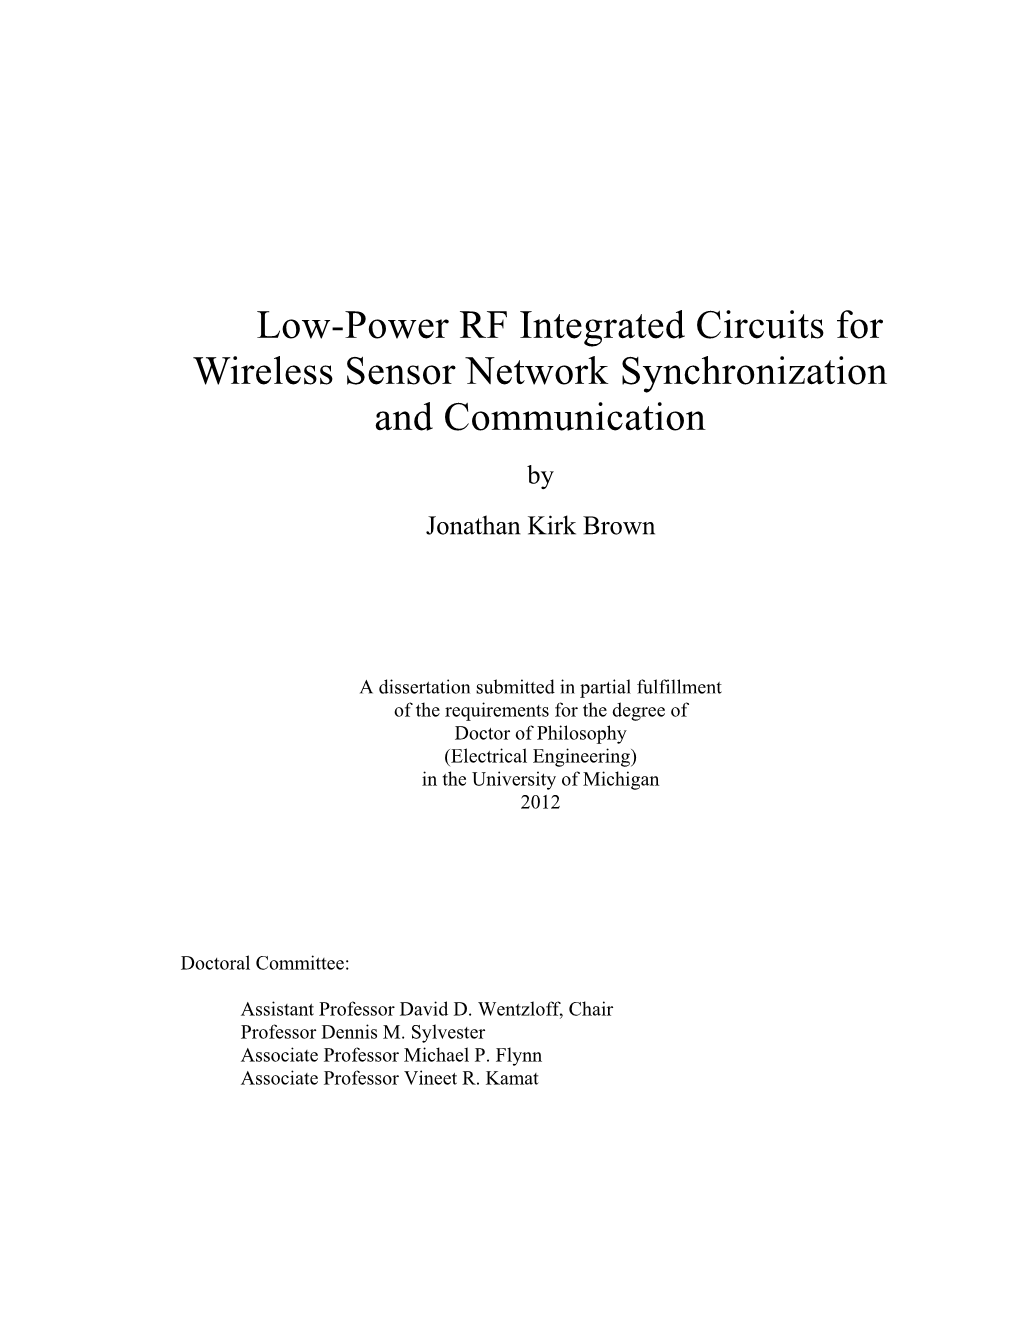 Low-Power RF Integrated Circuits for Wireless Sensor Network Synchronization and Communication by Jonathan Kirk Brown